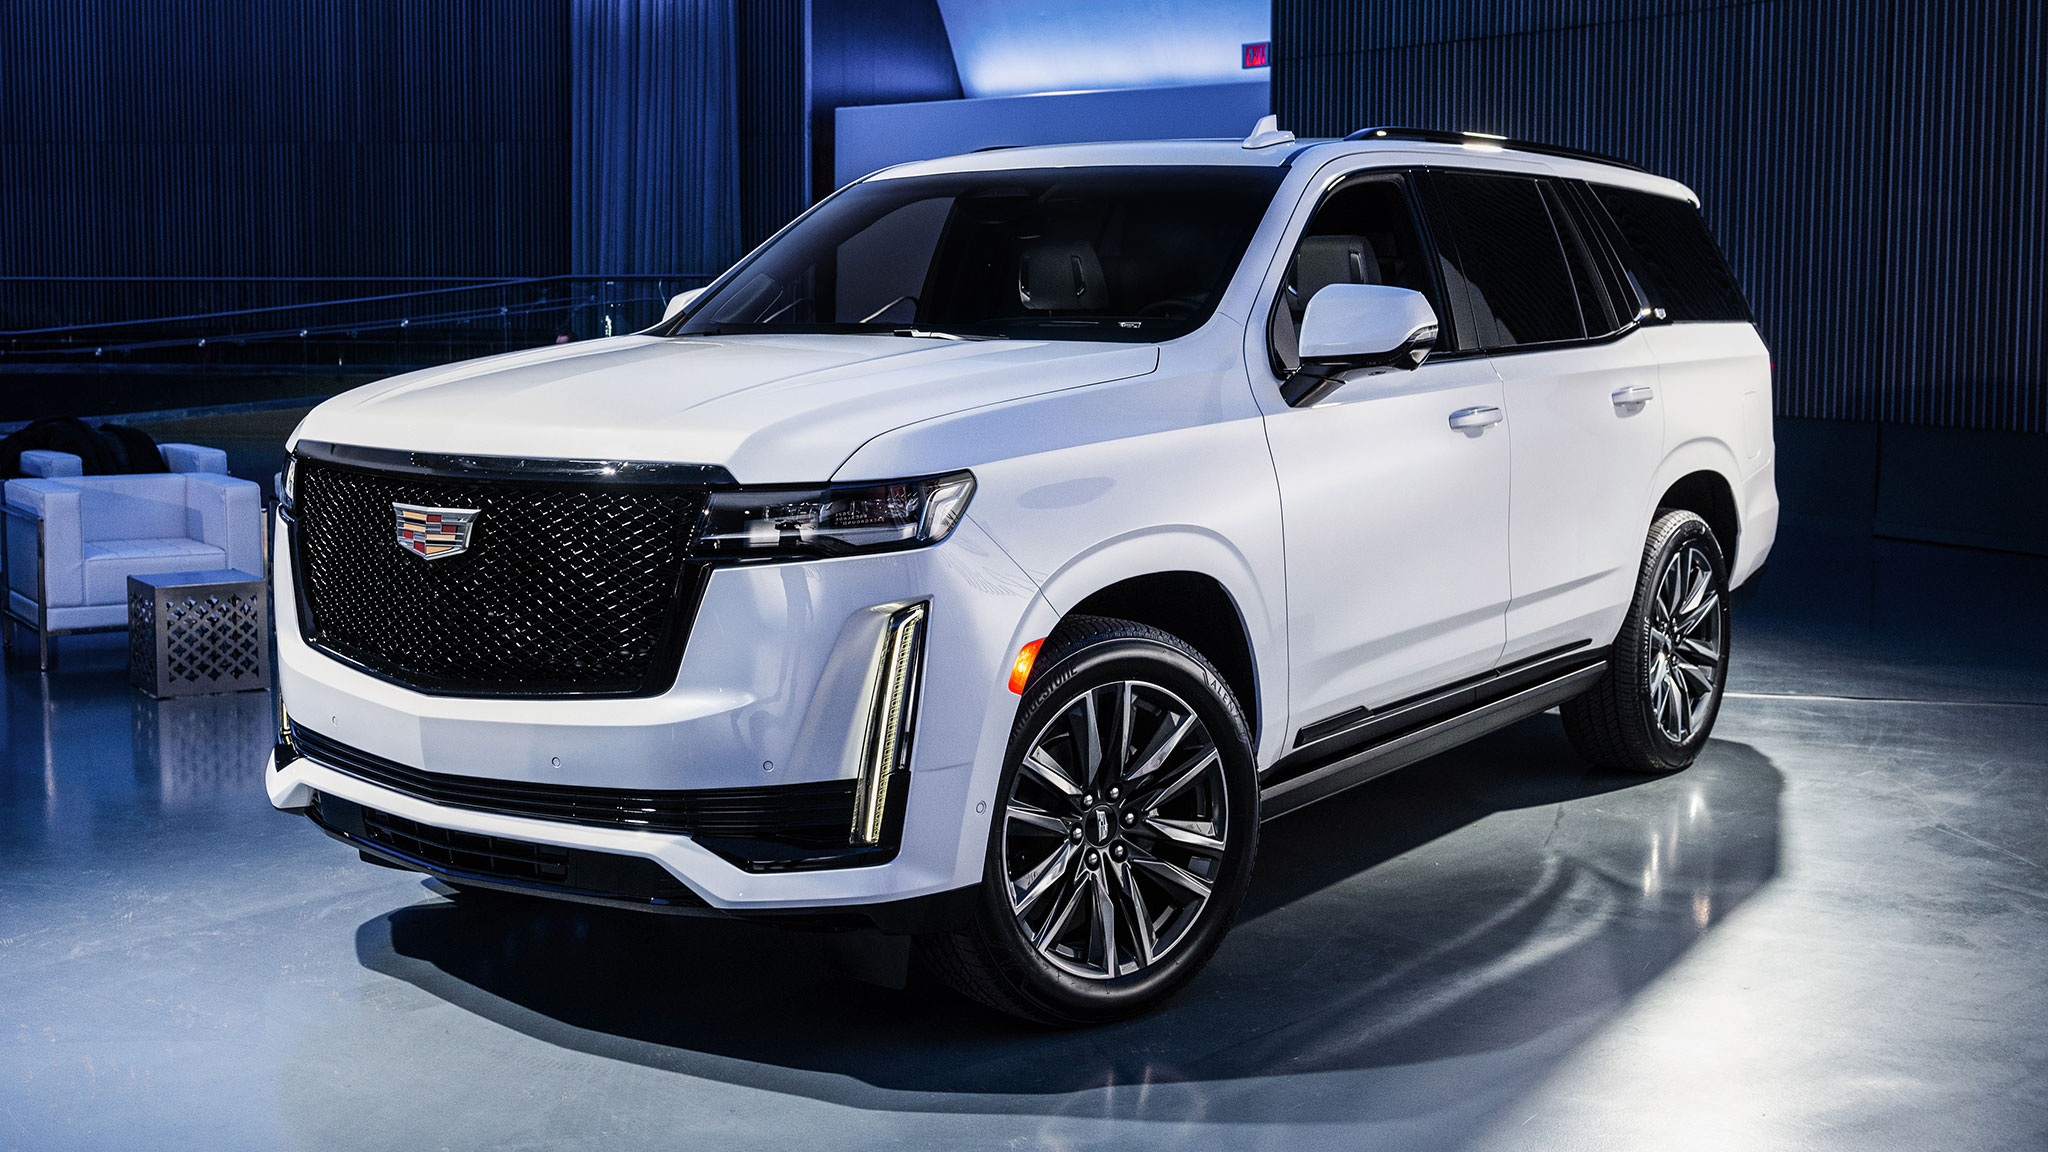 2022 Cadillac Escalade Oil Capacity, Transmission, Specifications